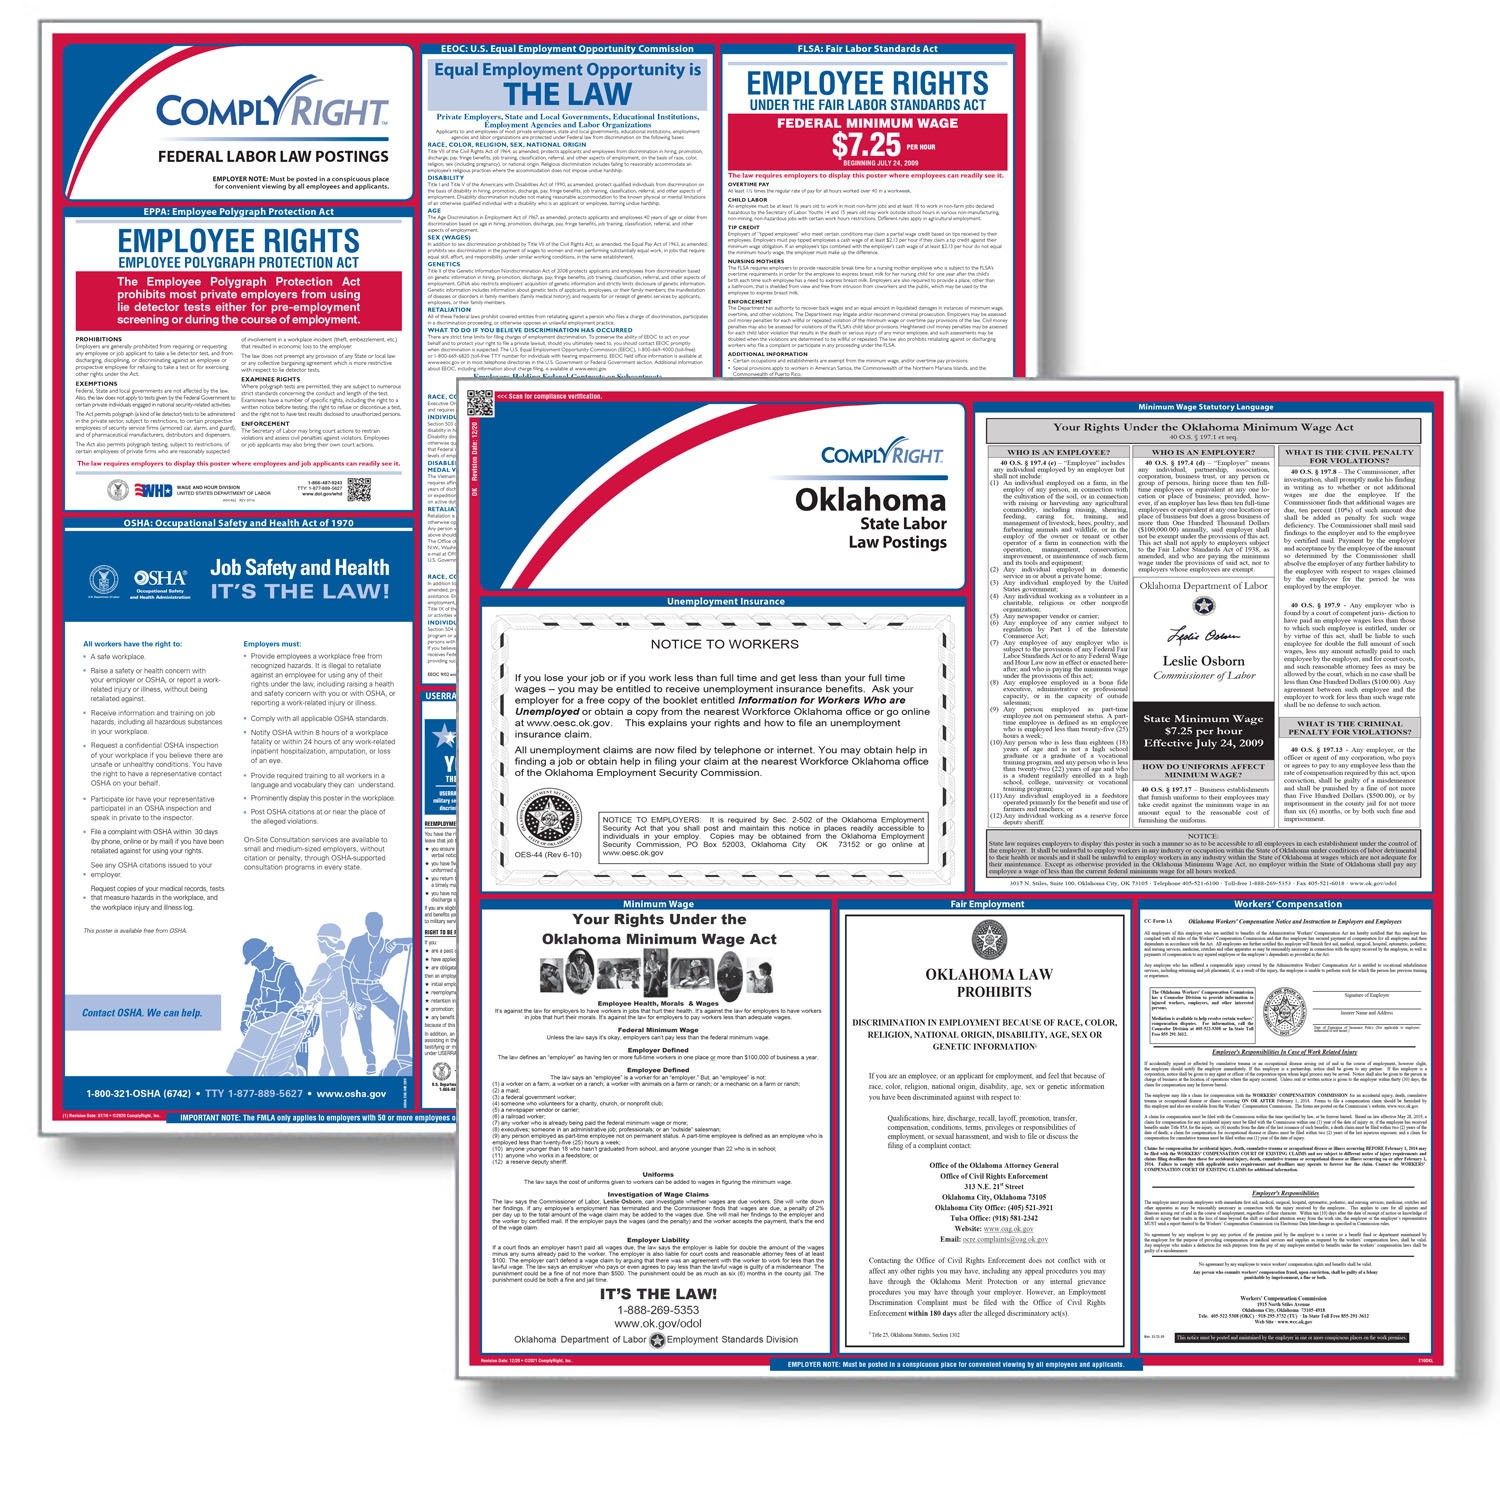 2023-kentucky-labor-law-poster-all-in-one-state-federal-fast-shipping